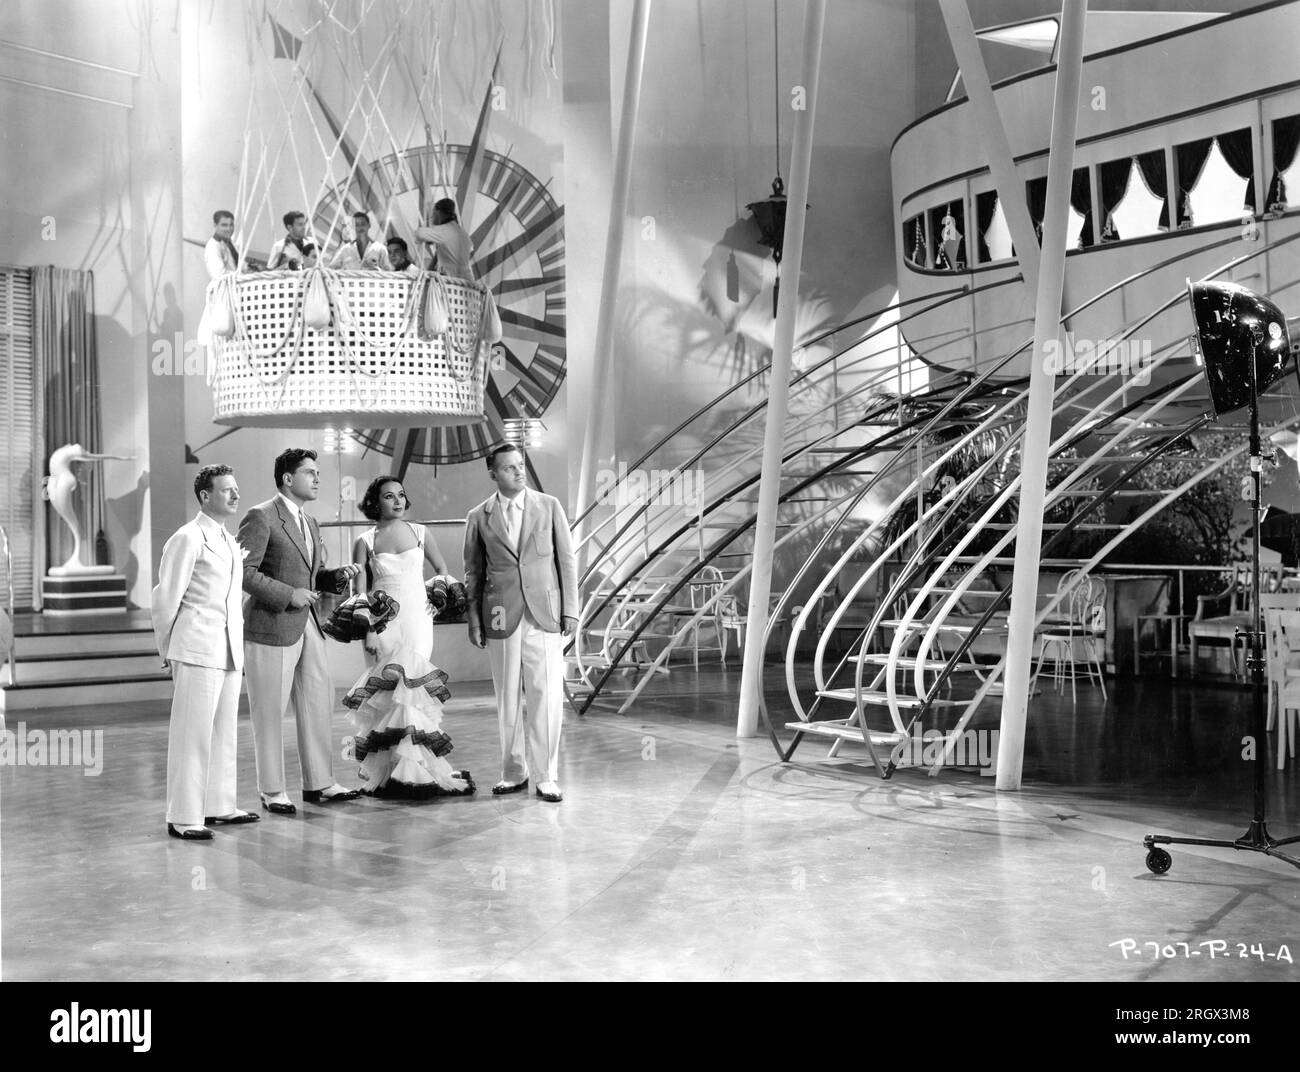 Head of Art Department VAN NEST POLGLASE Associate Producer LOU BROCK DOLORES DEL RIO and Unit Art Director CARROLL CLARK on set candid viewing the Dirigible nightclub set during filming of FLYING DOWN TO RIO 1933 director THORNTON FREELAND music Vincent Youmans lyrics Gus Kahn and Edward Eliscu costumes Walter Plunkett and (uncredited) Irene RKO Radio Pictures Stock Photo